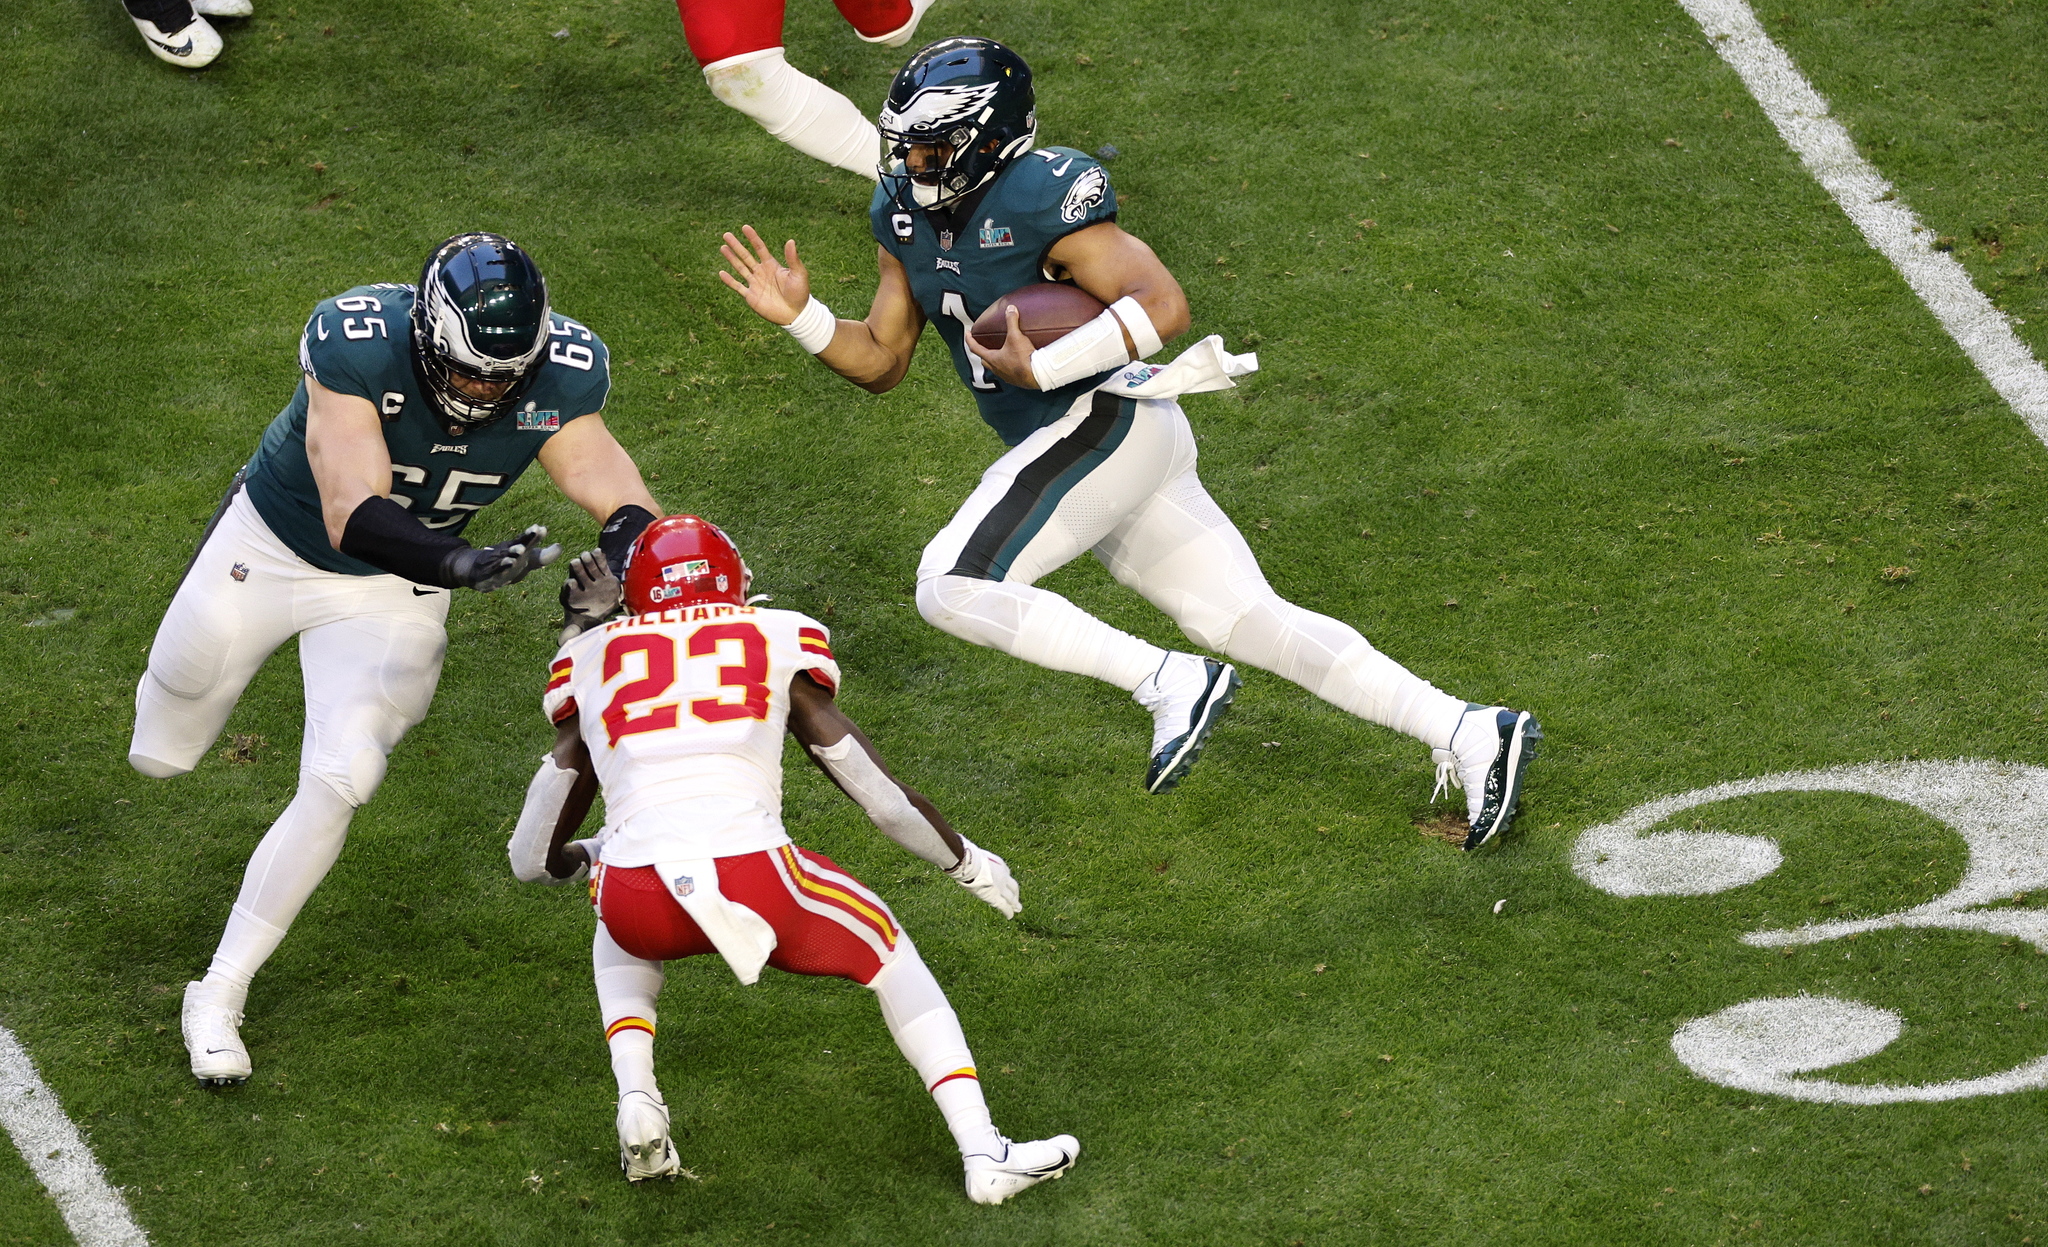 Glendale (United States), 12/02/2023.- Philadelphia  lt;HIT gt;Eagles lt;/HIT gt; quarterback Jalen Hurts (R) runs against the Kansas City Chiefs in the first quarter of Super Bowl LVII between the AFC champion Kansas City Chiefs and the NFC champion Philadelphia  lt;HIT gt;Eagles lt;/HIT gt; at State Farm Stadium in Glendale, Arizona, 12 February 2023. The annual Super Bowl is the Championship game of the NFL between the AFC Champion and the NFC Champion and has been held every year since January of 1967. (Estados Unidos, Filadelfia) EFE/EPA/JOHN G. MABANGLO